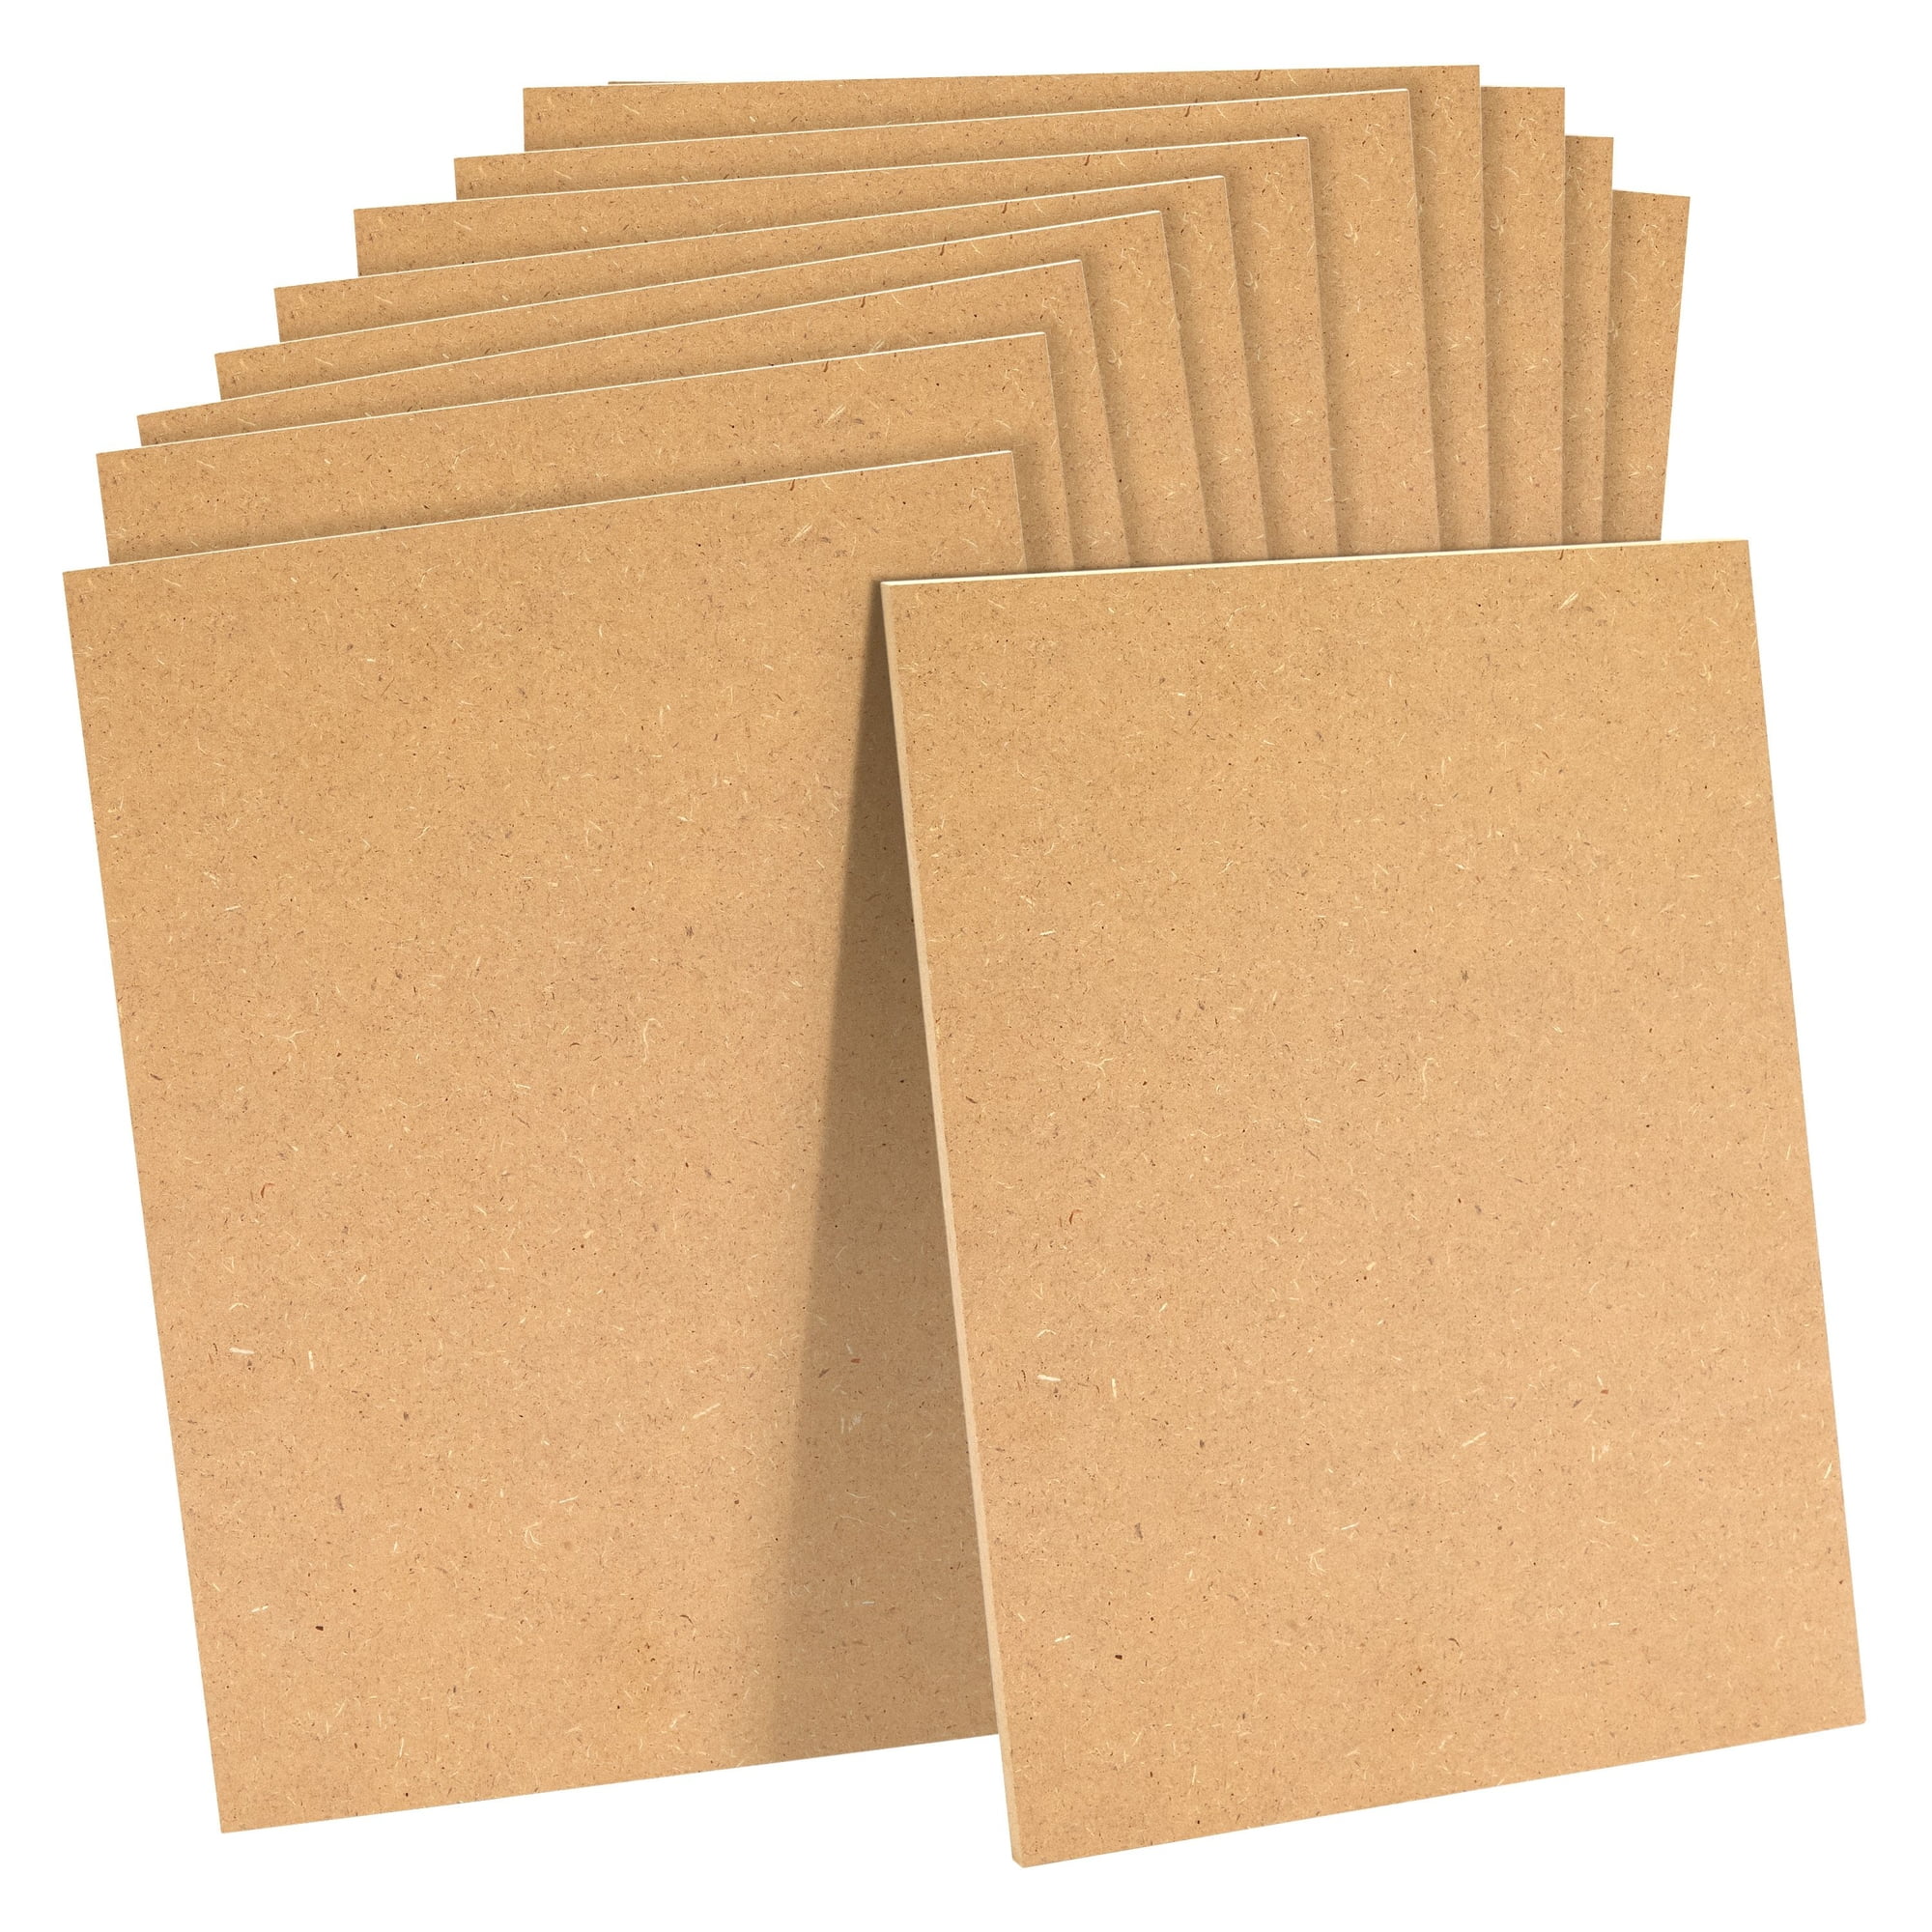  Seajan 32 Pcs 50 Pt 11'' x 8.5'' Assorted Colored Chipboard  Sheets Thick Book Board Heavy Duty Cardboard for Crafts Kraft Board Book  Binding Cover for School Kids Stamp Crafts Supplies (